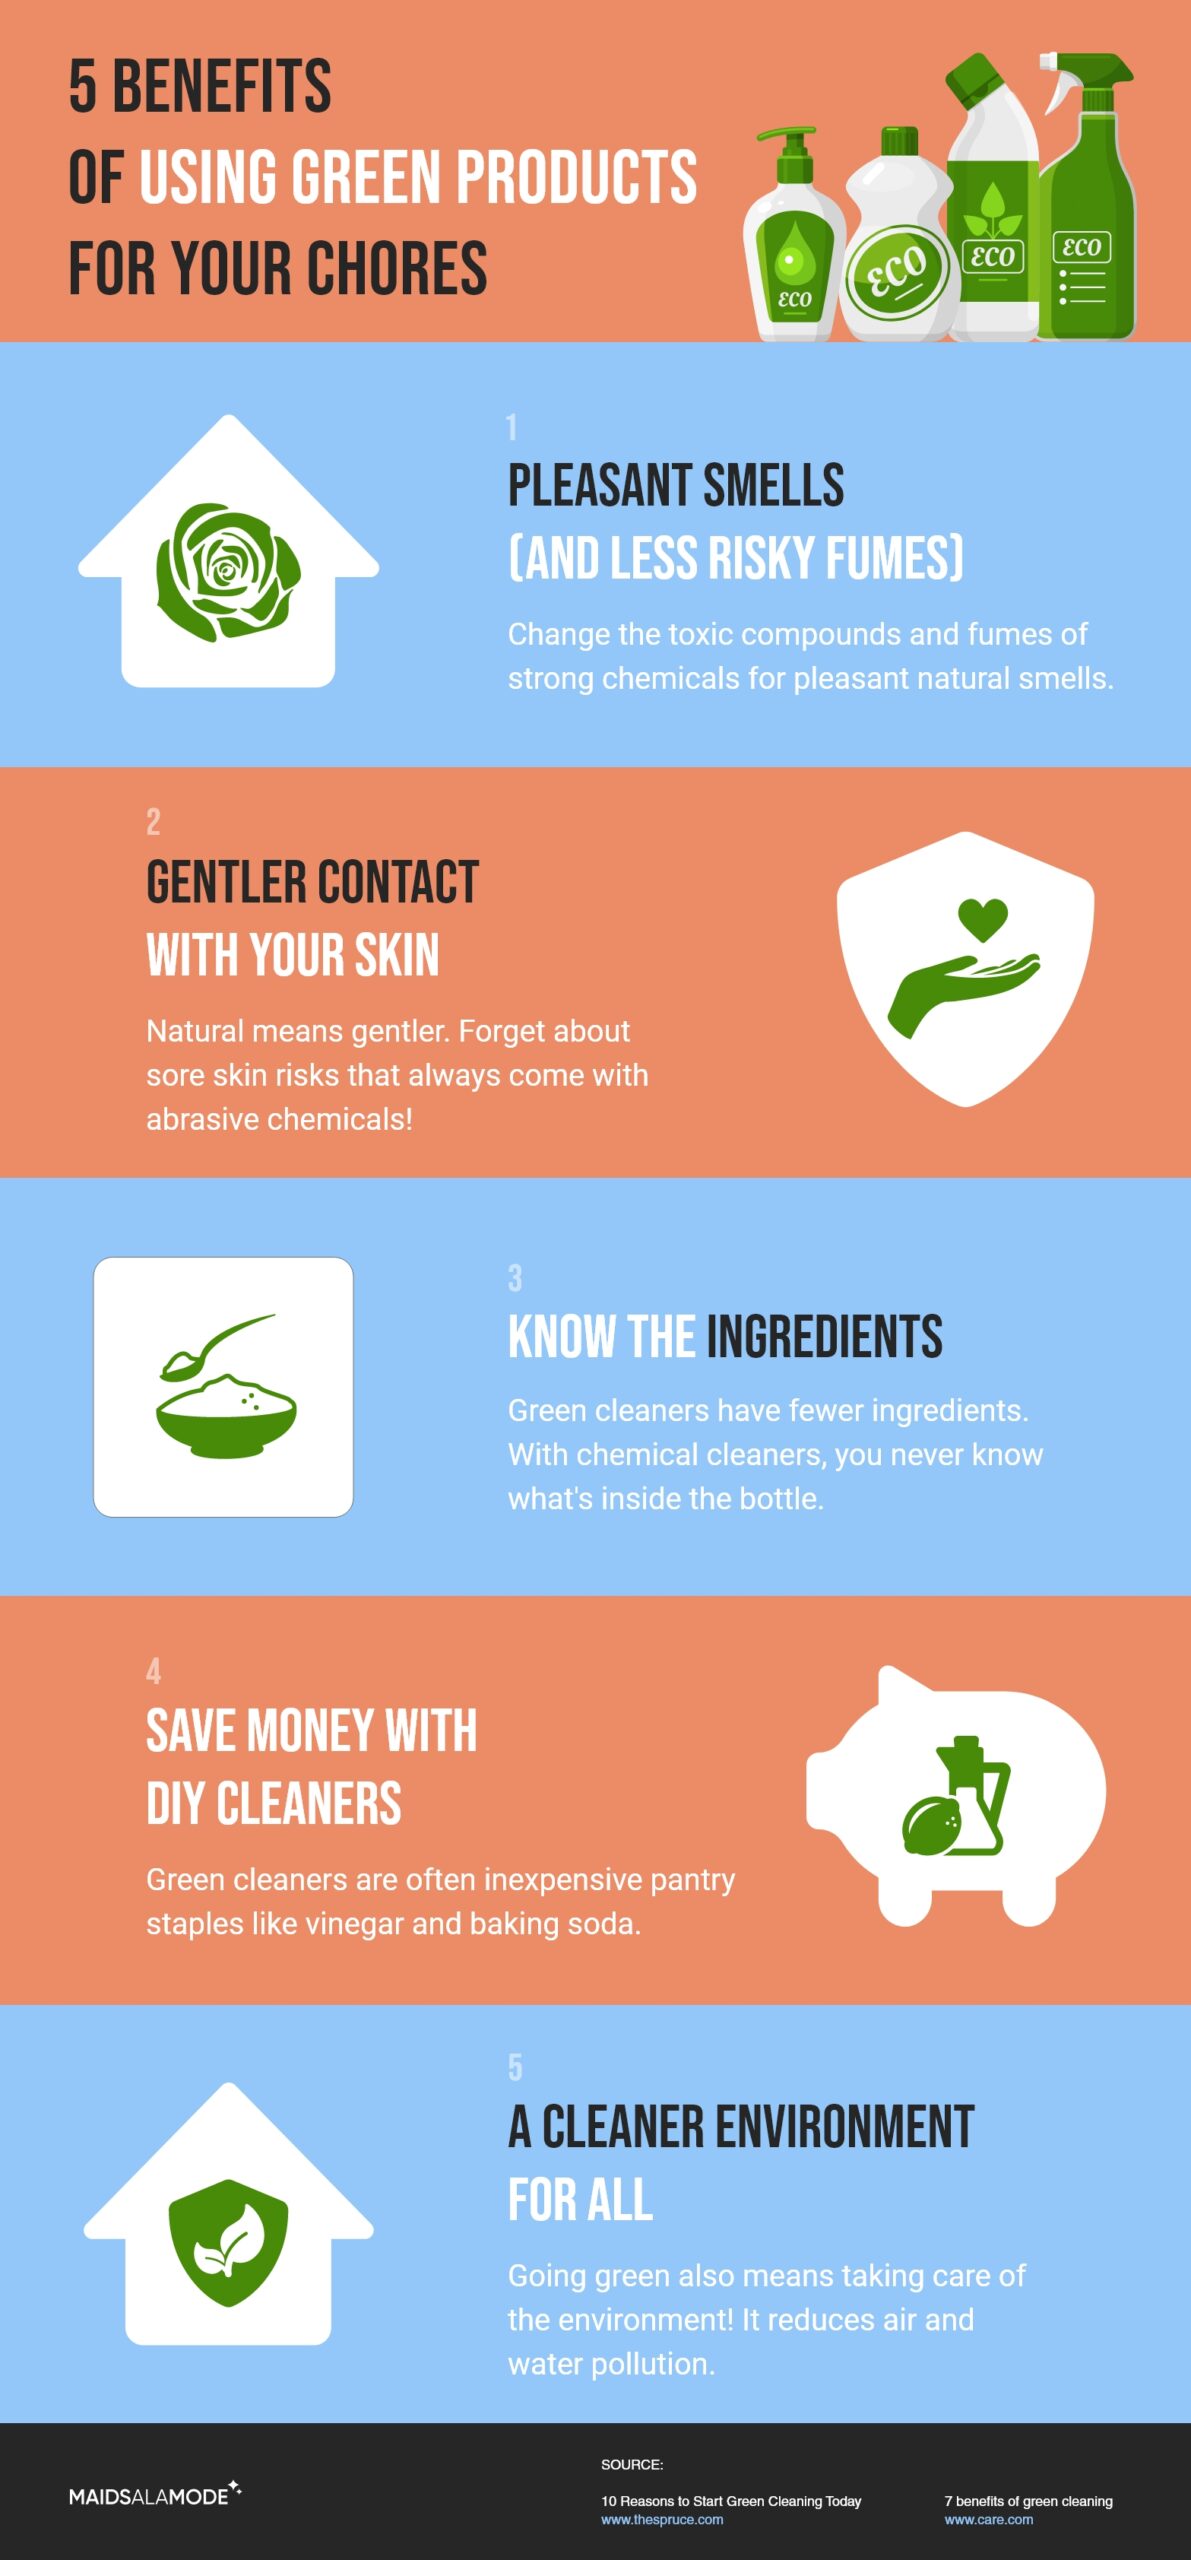 II. Environmental Benefits of Green Cleaning Products